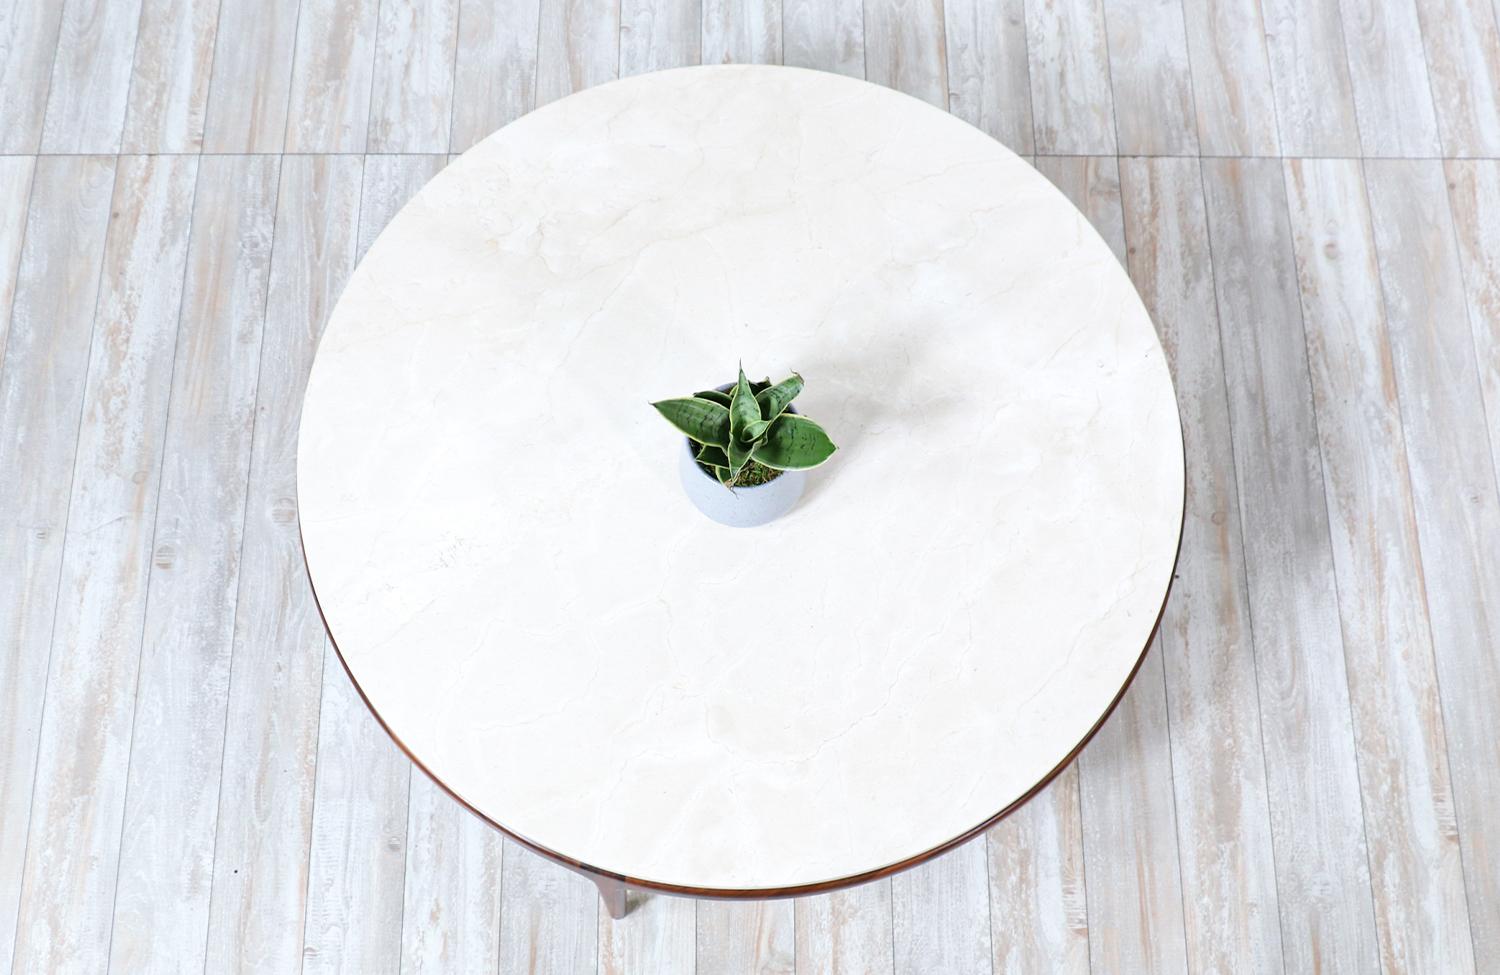 Mid-20th Century Mid-Century Modern “Rythm” Coffee Table with Crema Marfil Stone Top by Lane